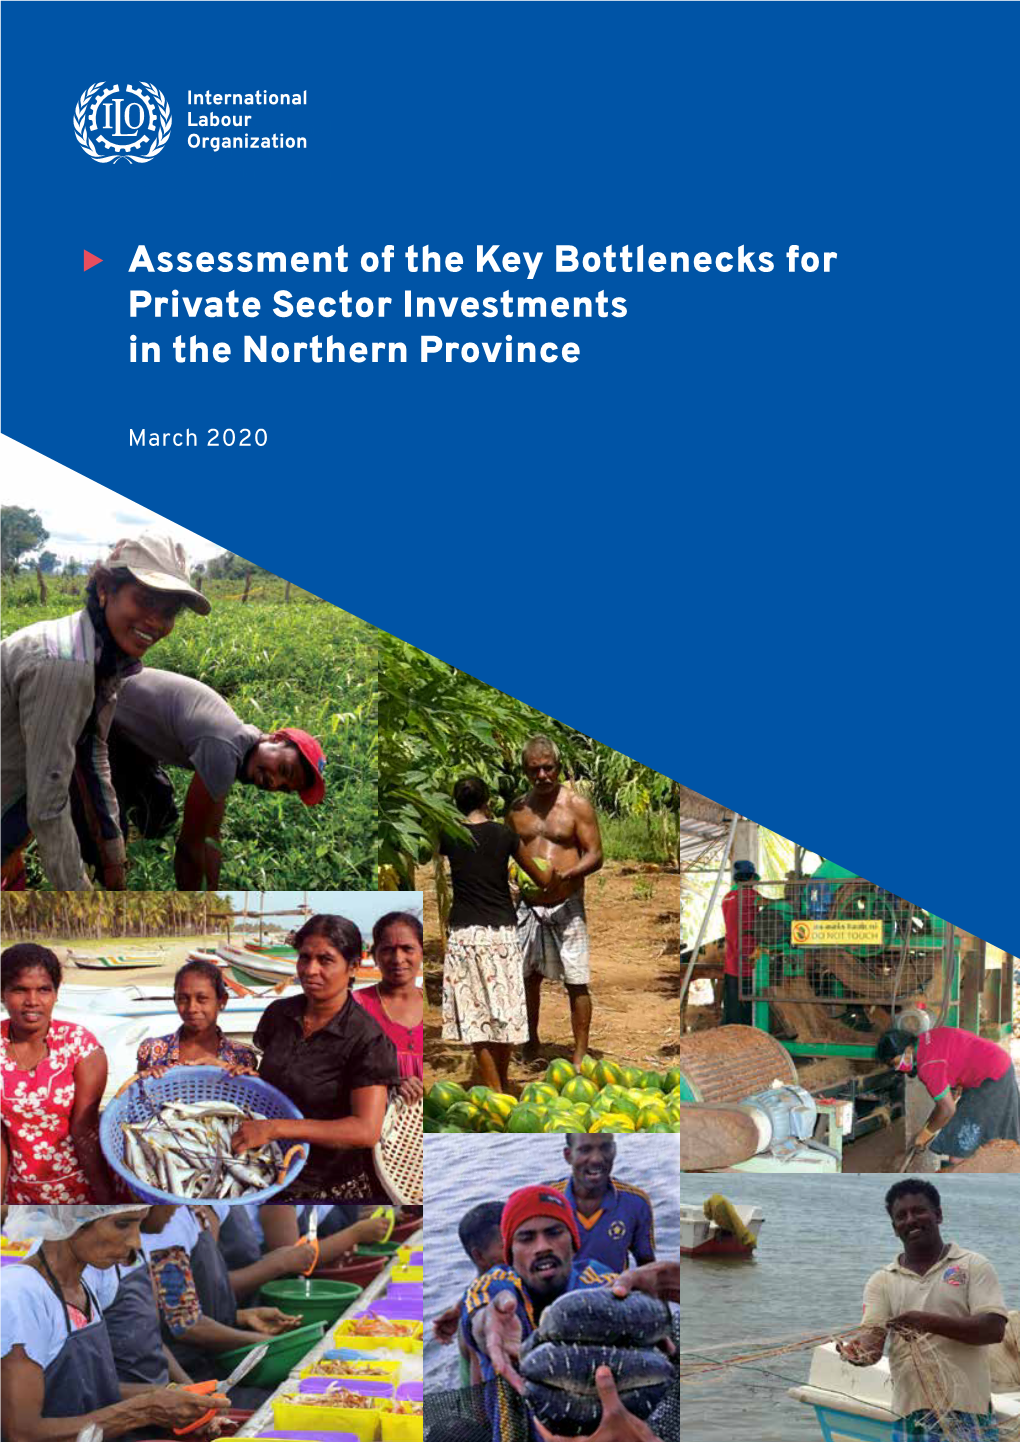 Assessment of the Key Bottlenecks for Private Sector Investments in the Northern Province